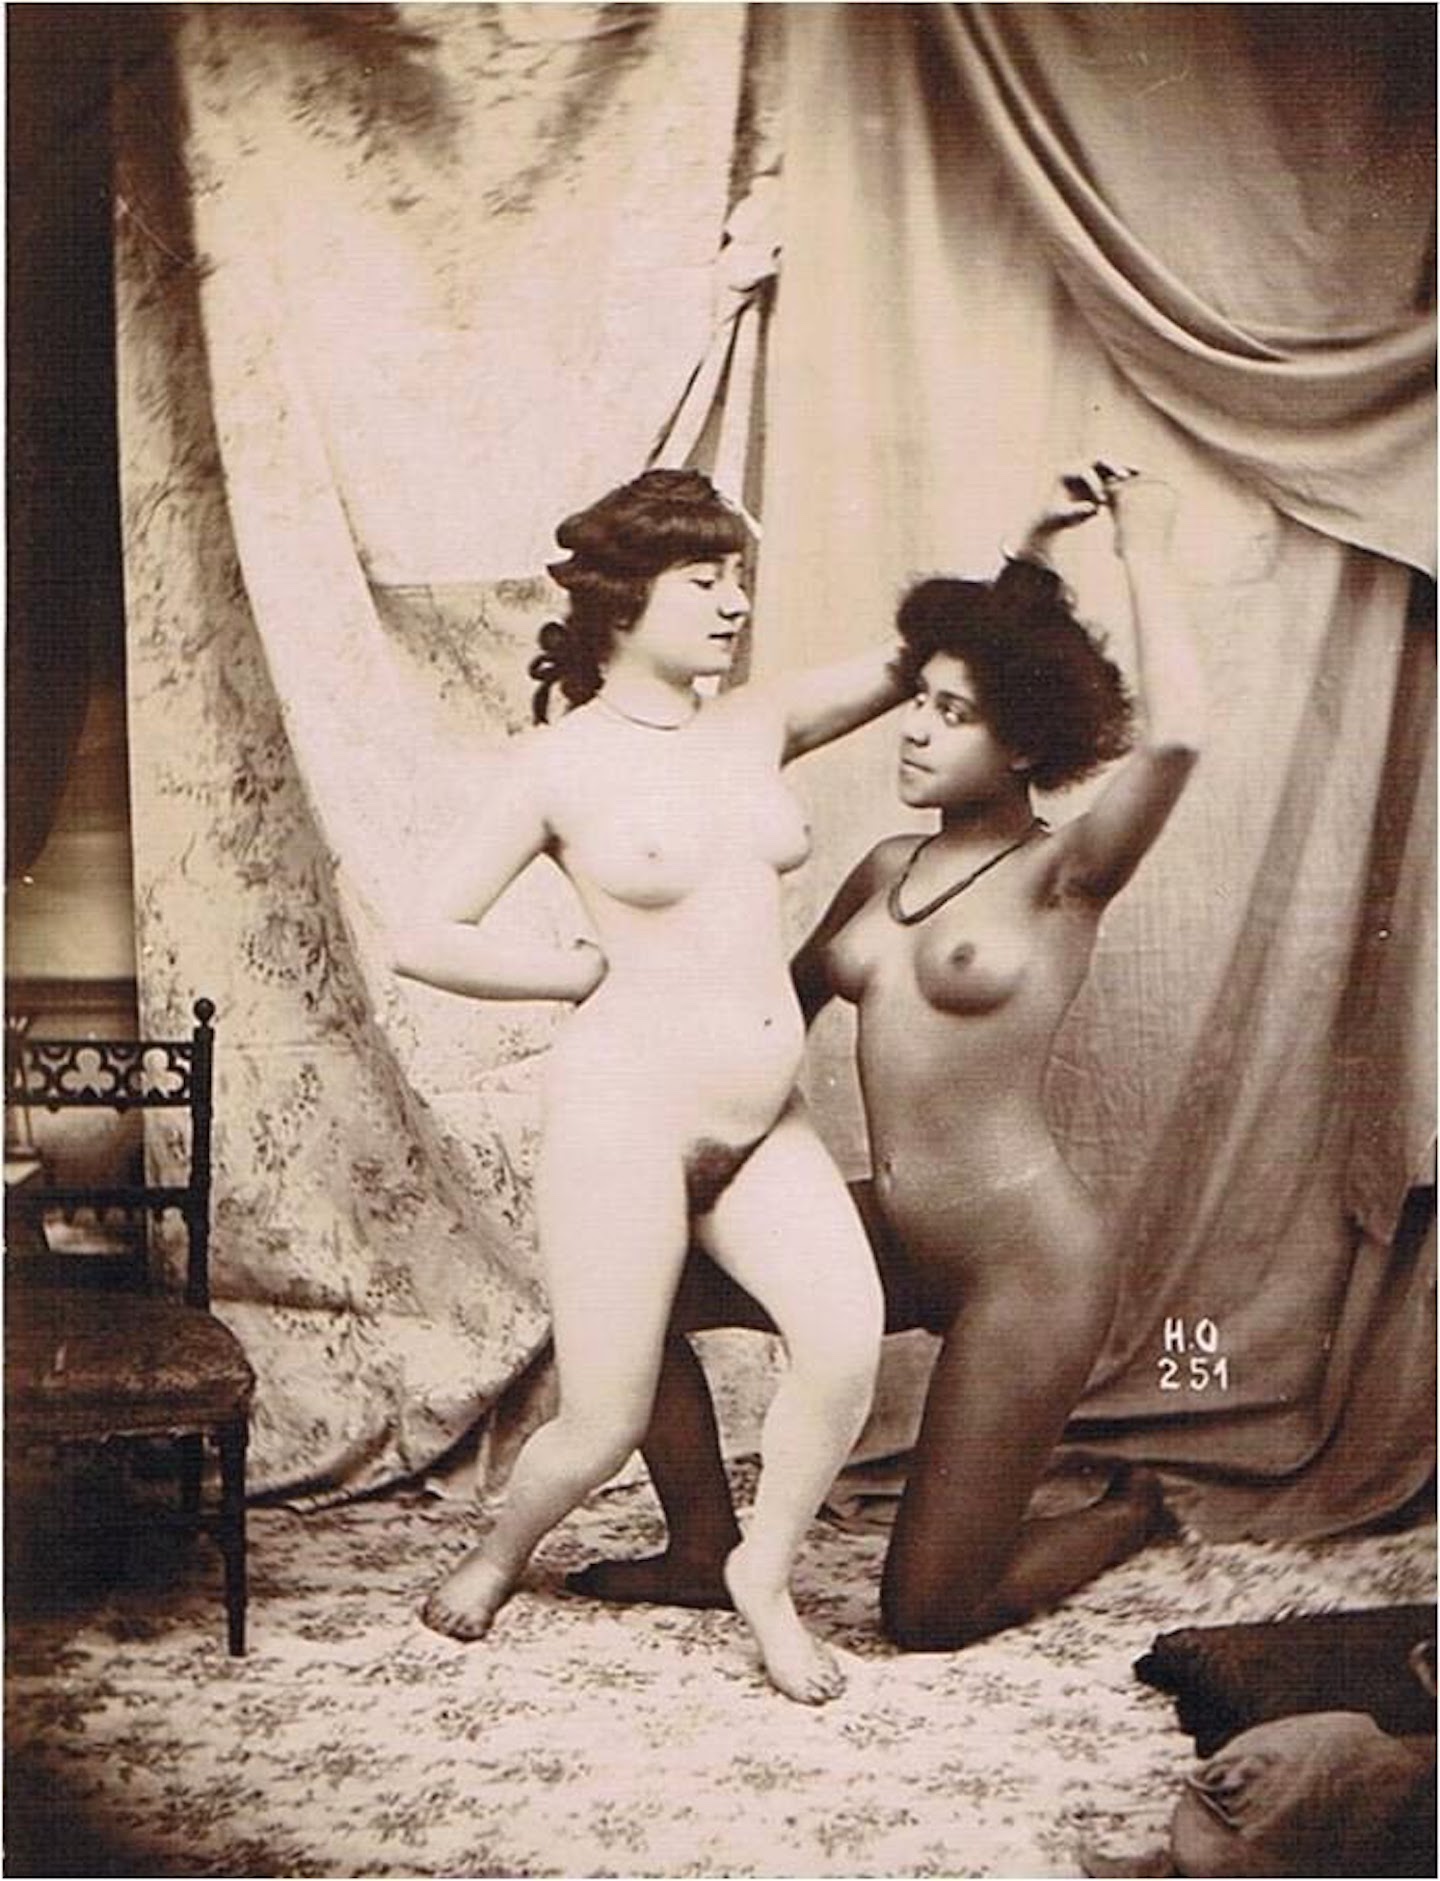 Victorian Porn - The Unbridled Joy of Victorian Porn - VICE